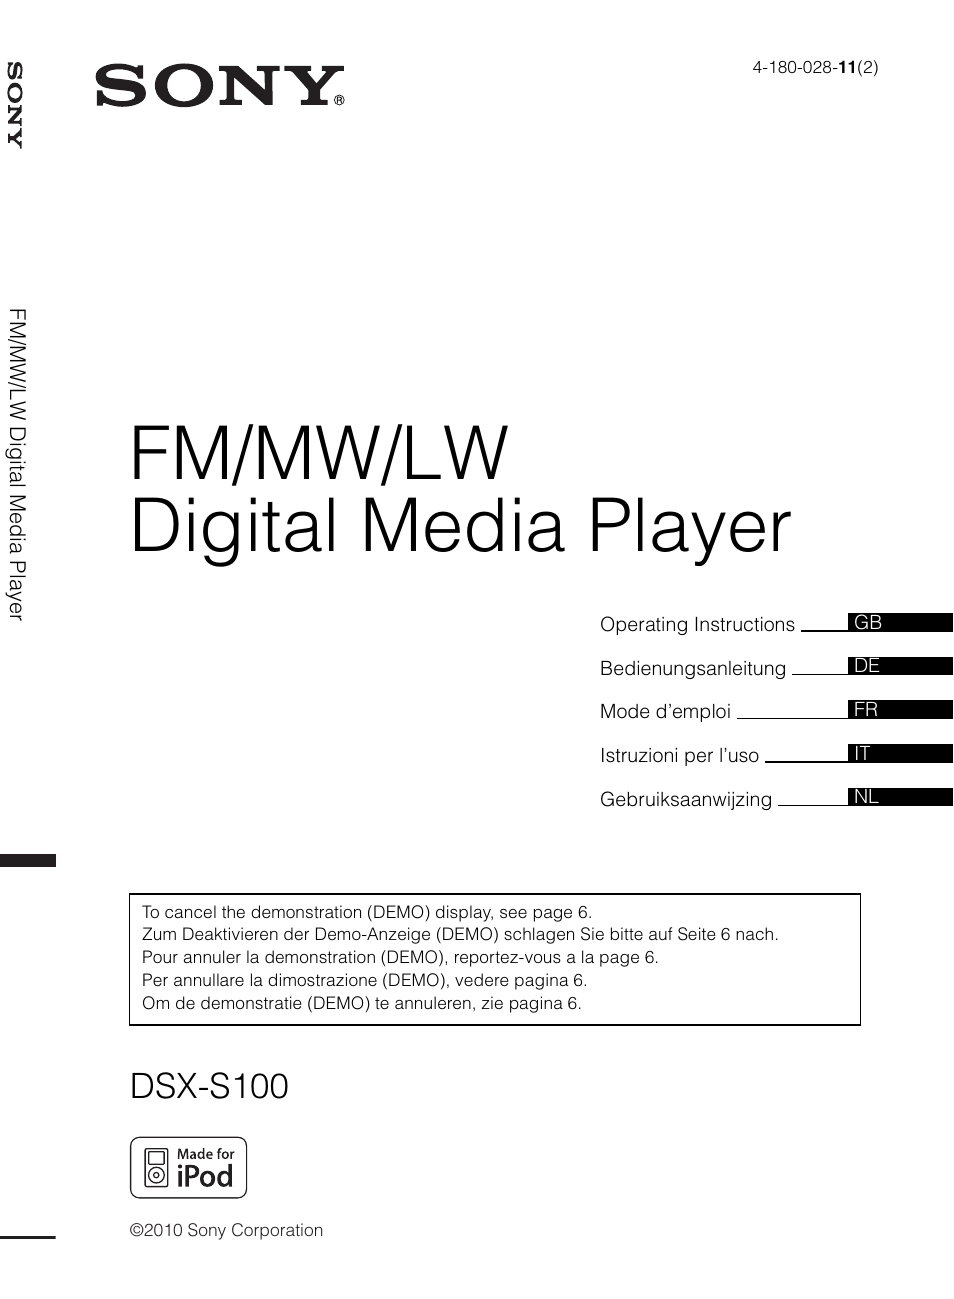 Sony DSX-S100 User Manual | 132 pages